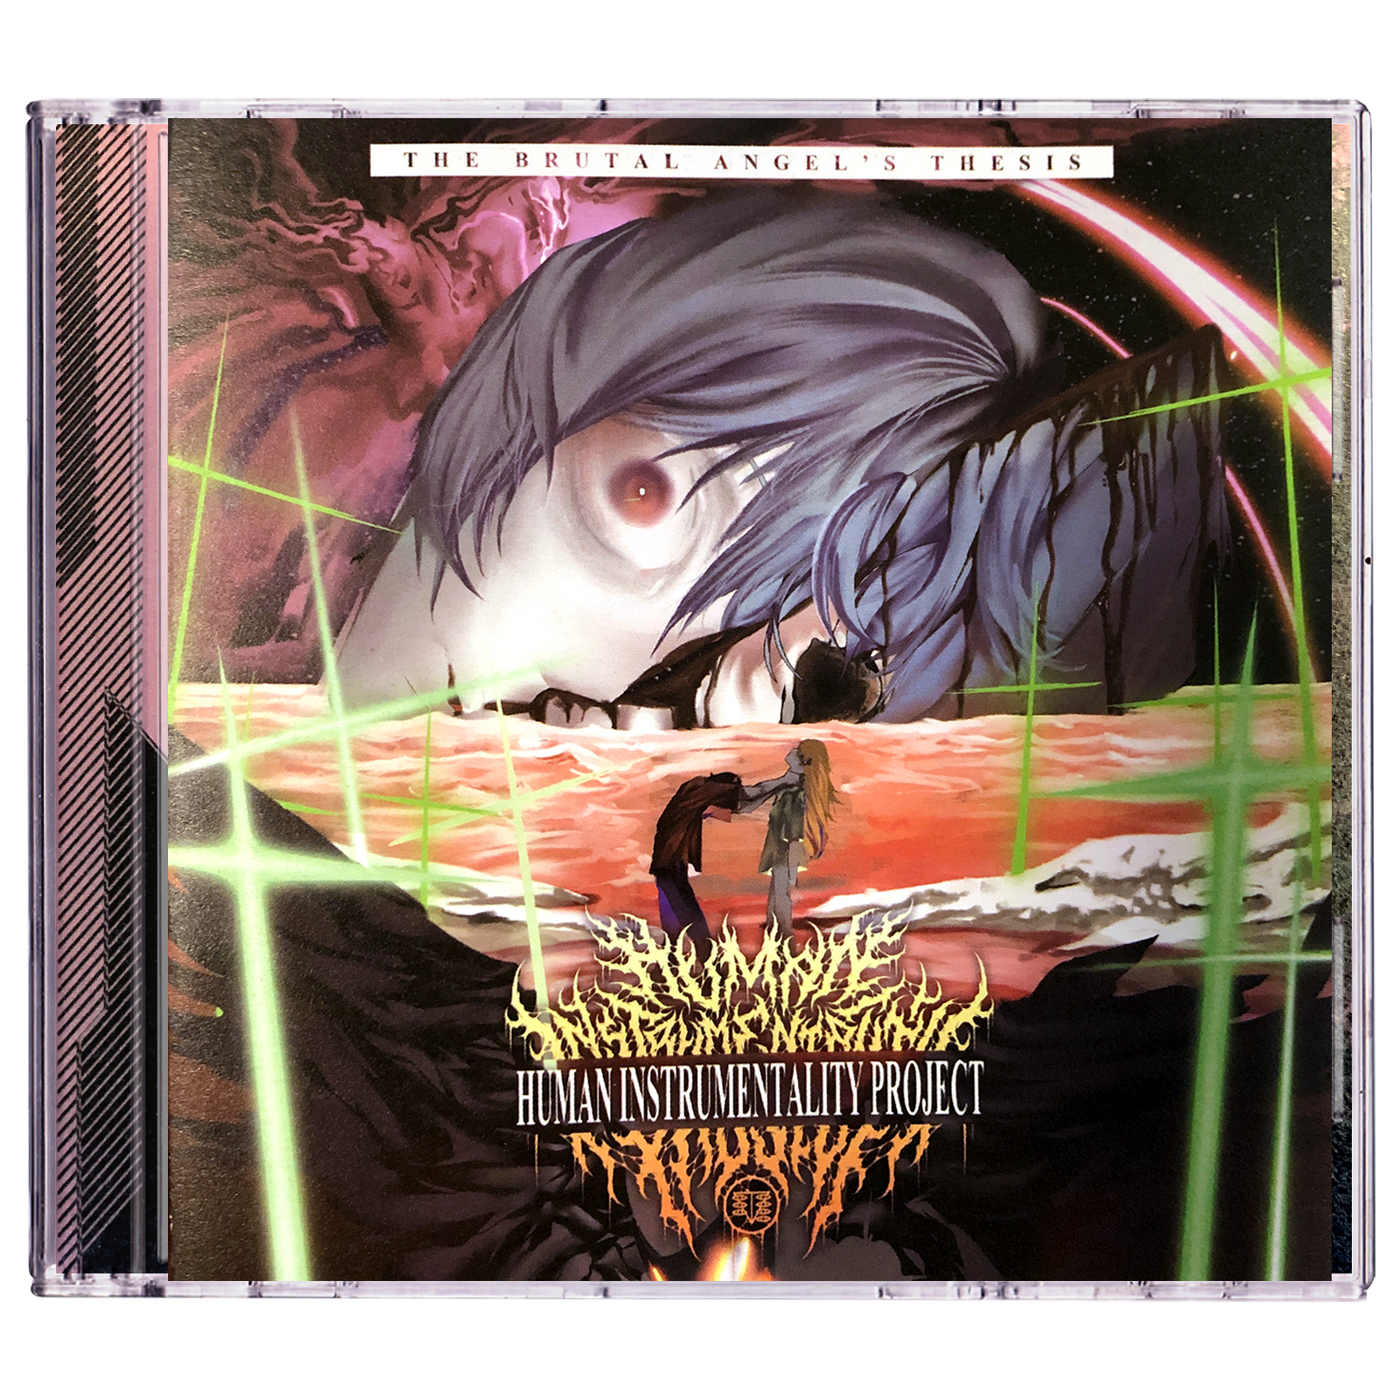 Human Instrumentality Project 'The Brutal Angel’s Thesis' CD